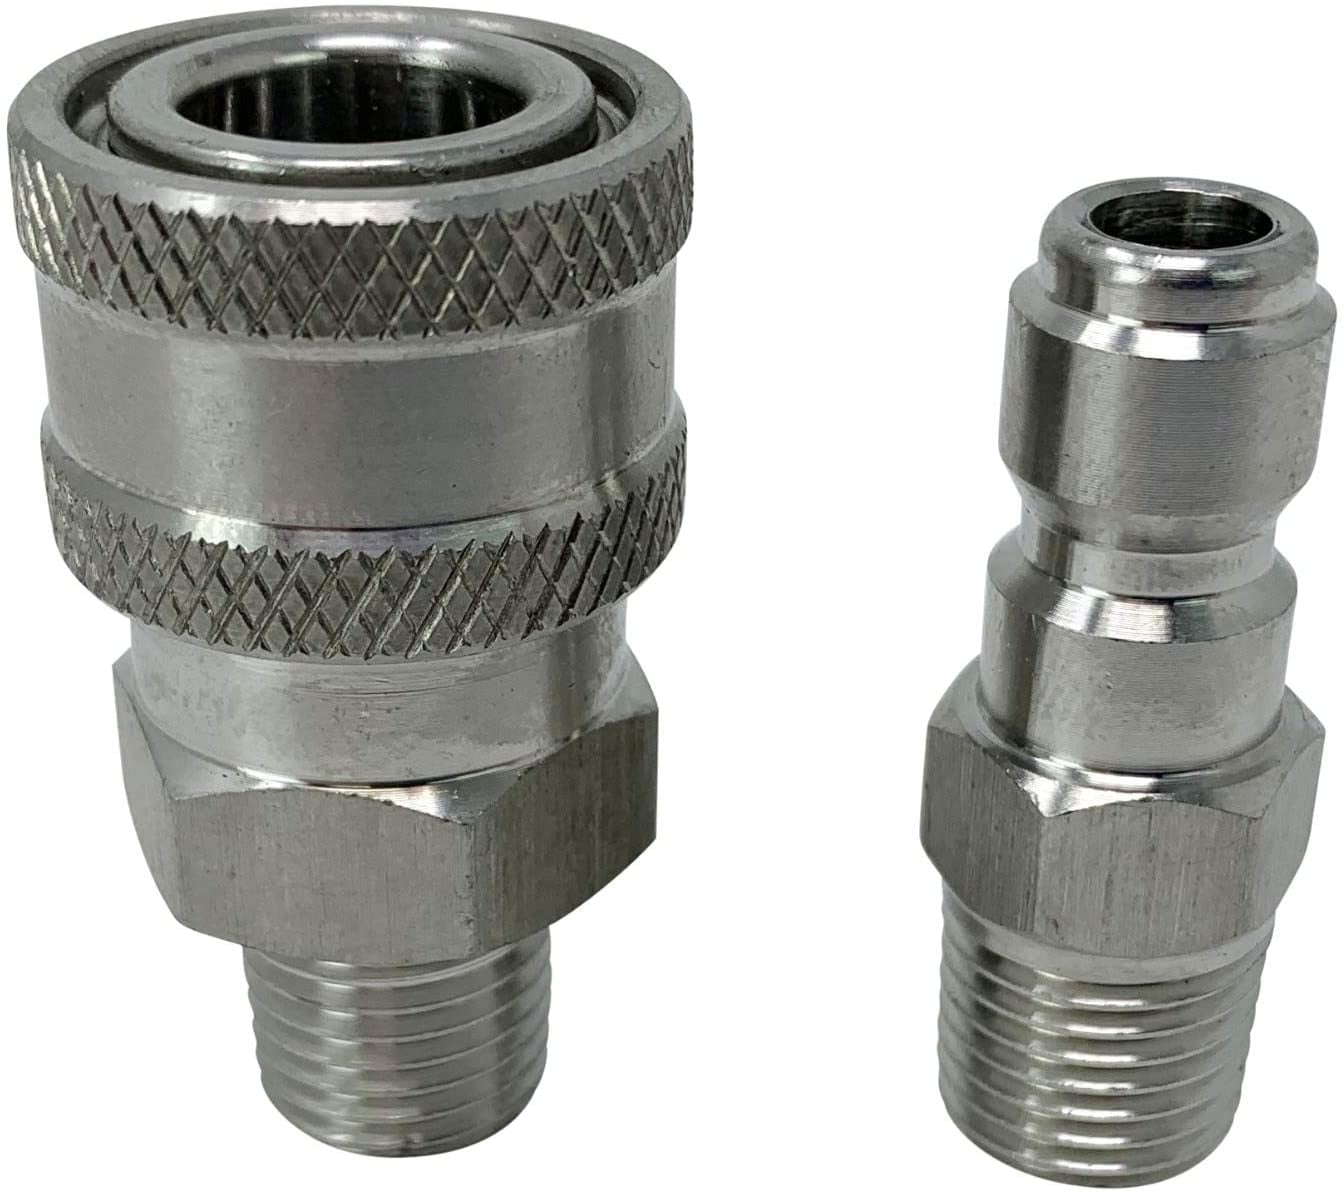 Steel Pressure Washer .840" = 1/2" NPT Size .Male Quick Connect Plug Coupler 